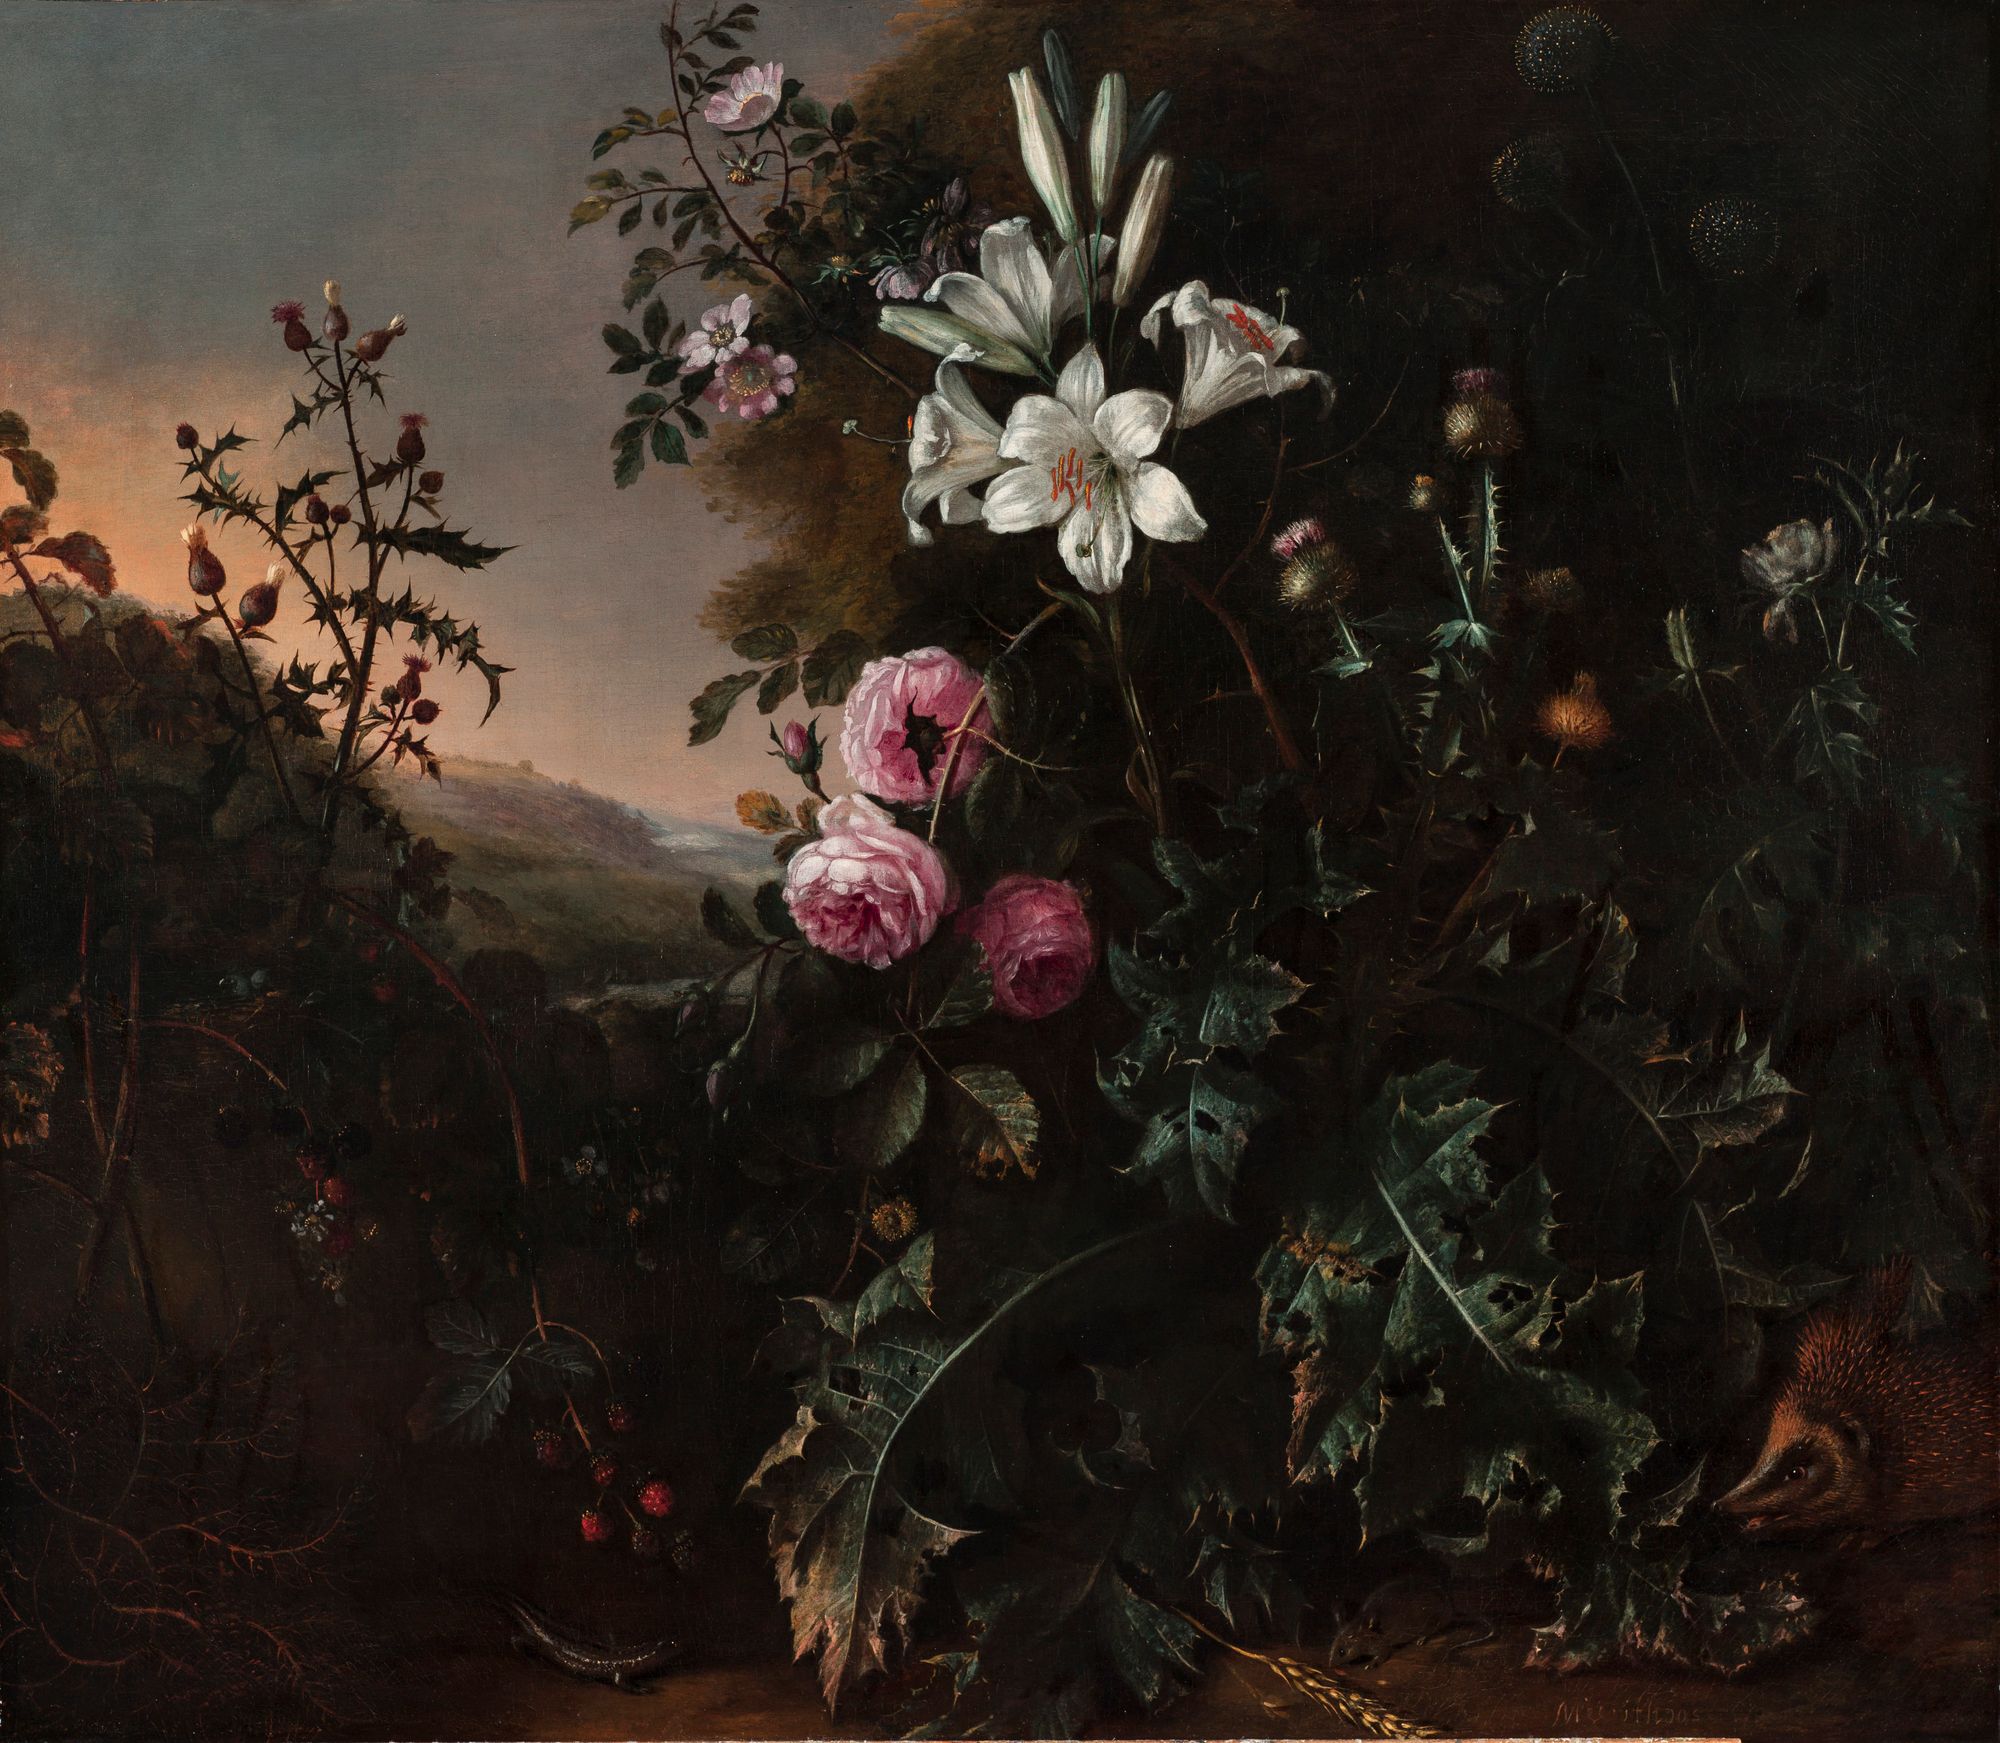 The entirity of a painting depicting pink and white flowers growing in greenery, with a small hedgehog and some berries in the foreground and rolling hills and blue sky in the backgroud.